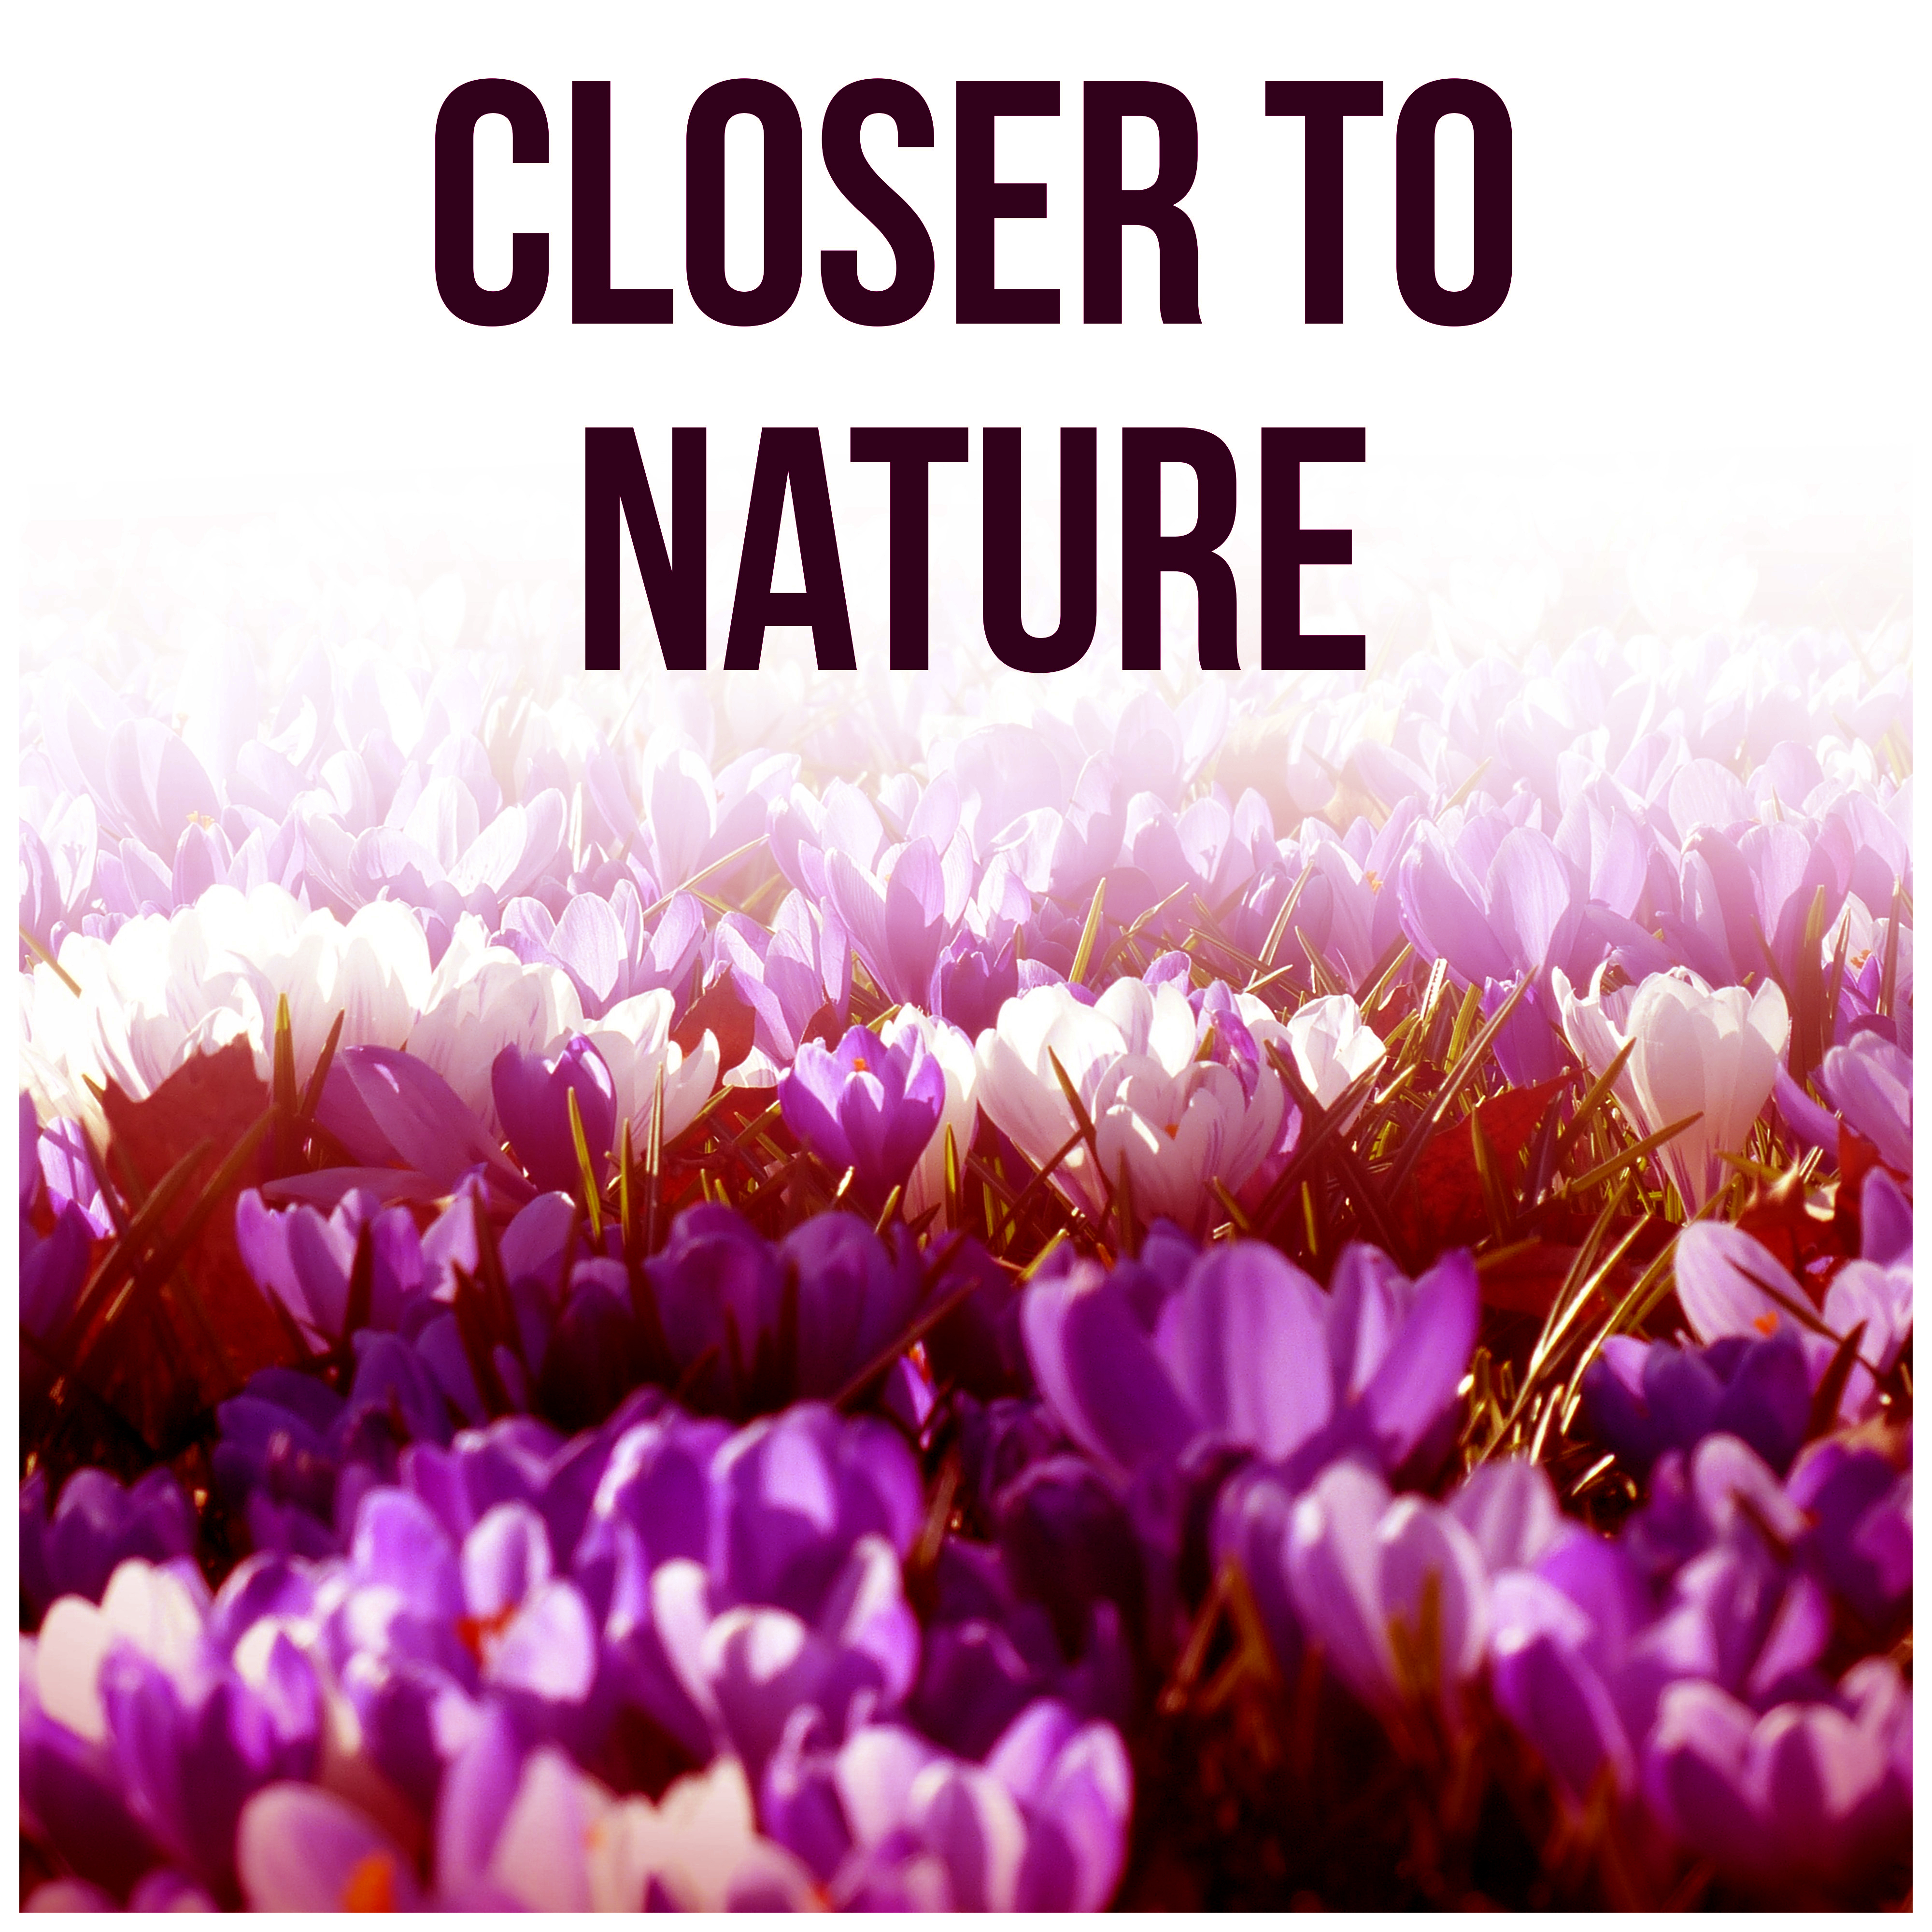 Closer to Nature - Feel Good, Easy Listening, Crystal World, Nature Sounds, Calmness, Water